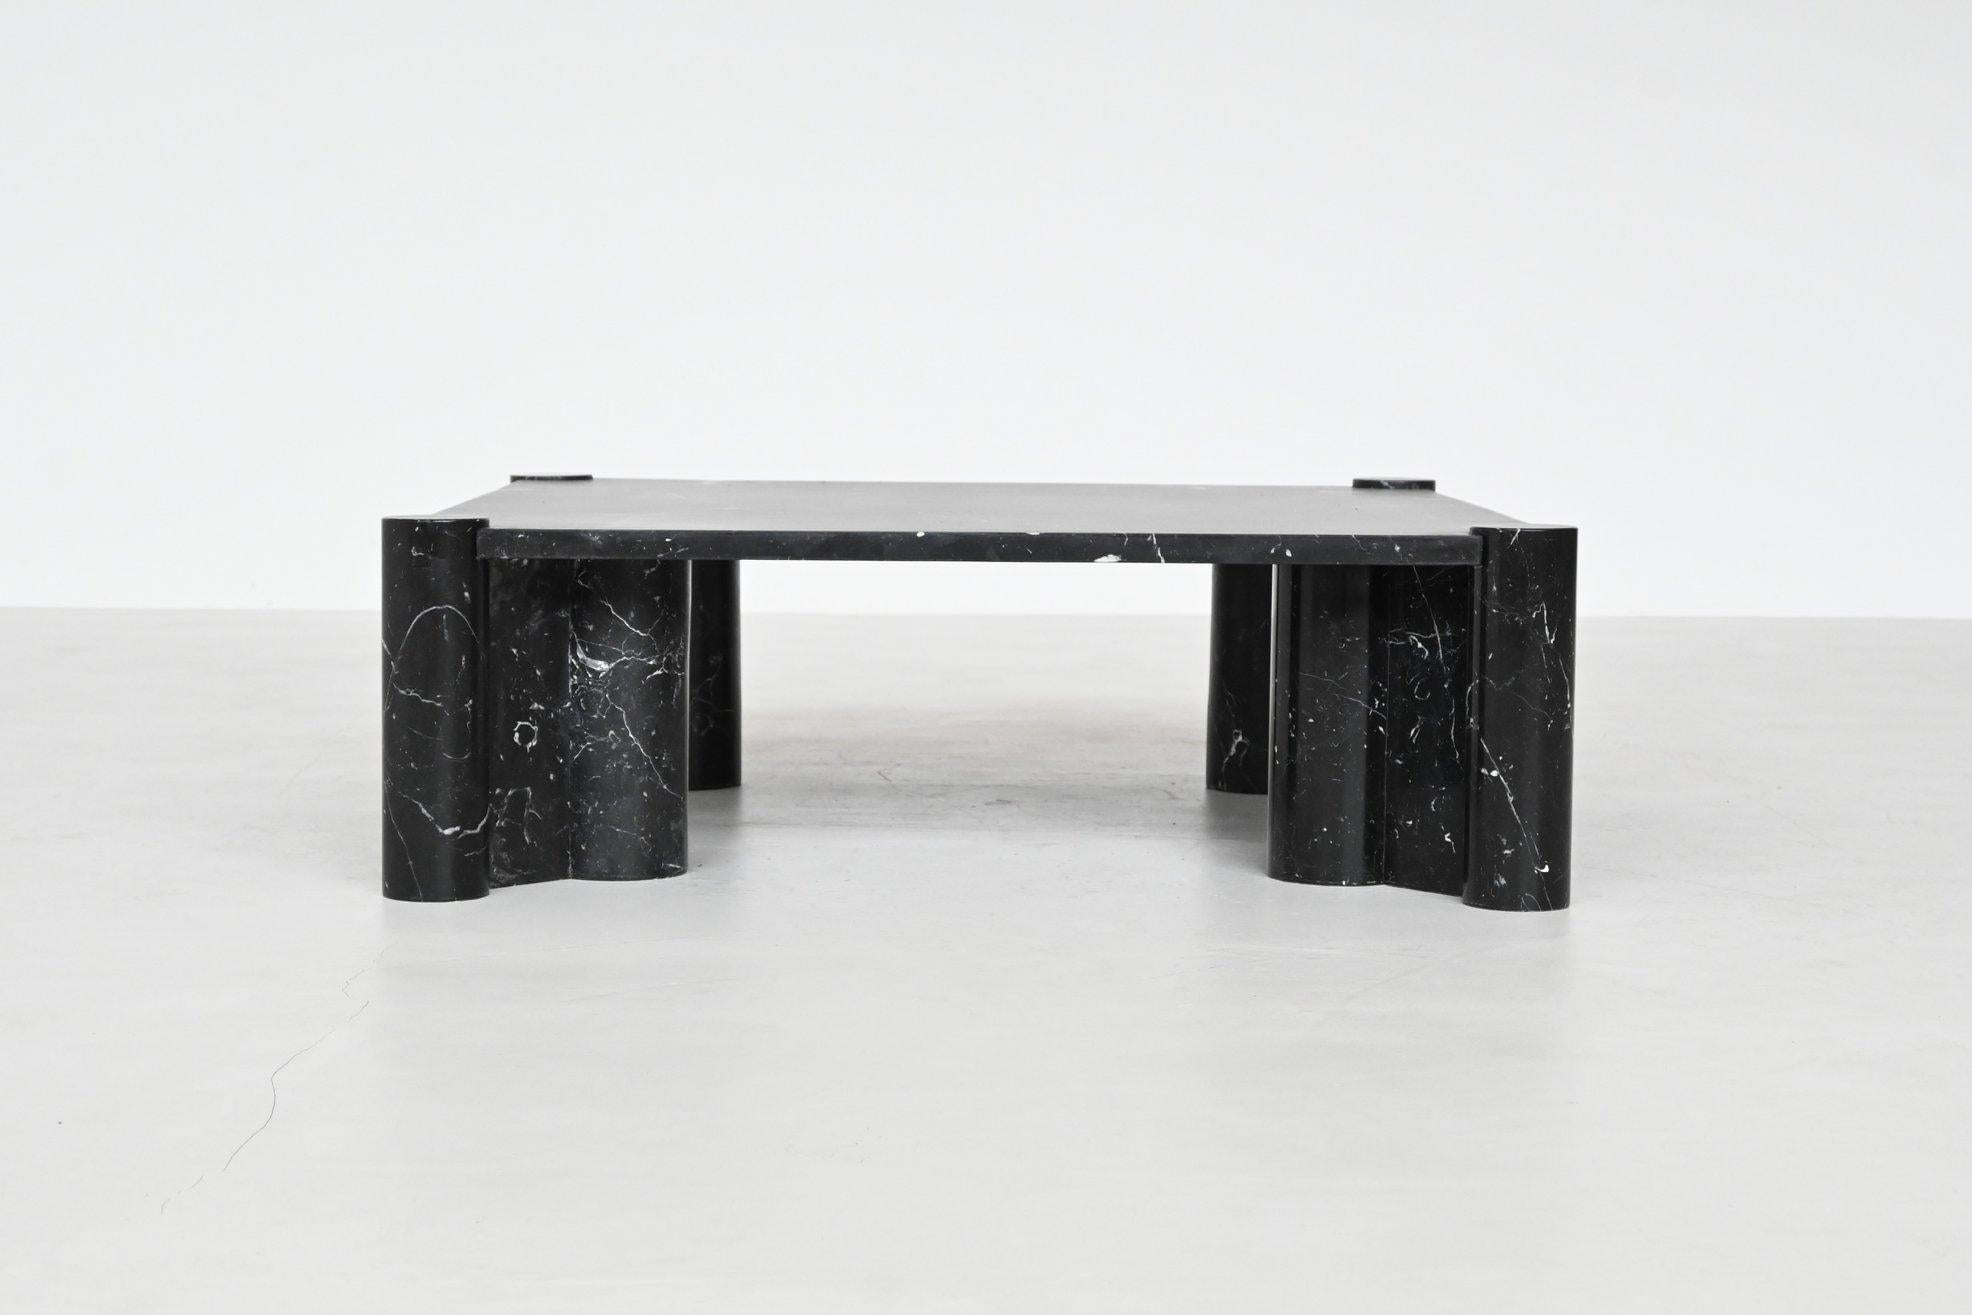 Impressive and early edition 'Jumbo' coffee table designed by Gae Aulenti and manufactured by Knoll International, Italy 1965. This example was made in gorgeous black Marquina marble with white veins running through it. What makes this particular